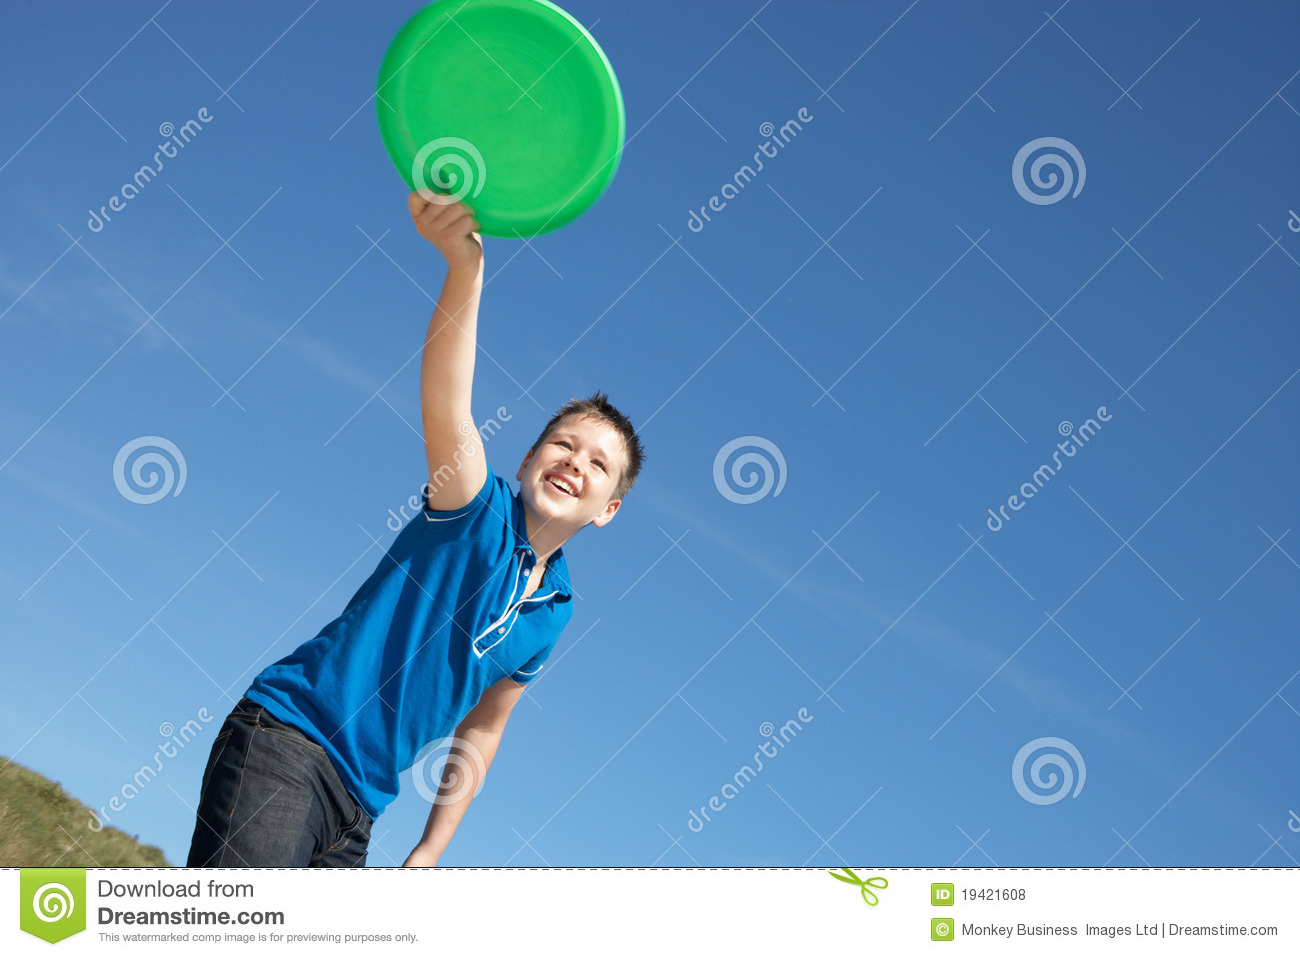 Boy Playing Frisbee On Beach Royalty Free Stock Photos   Image    